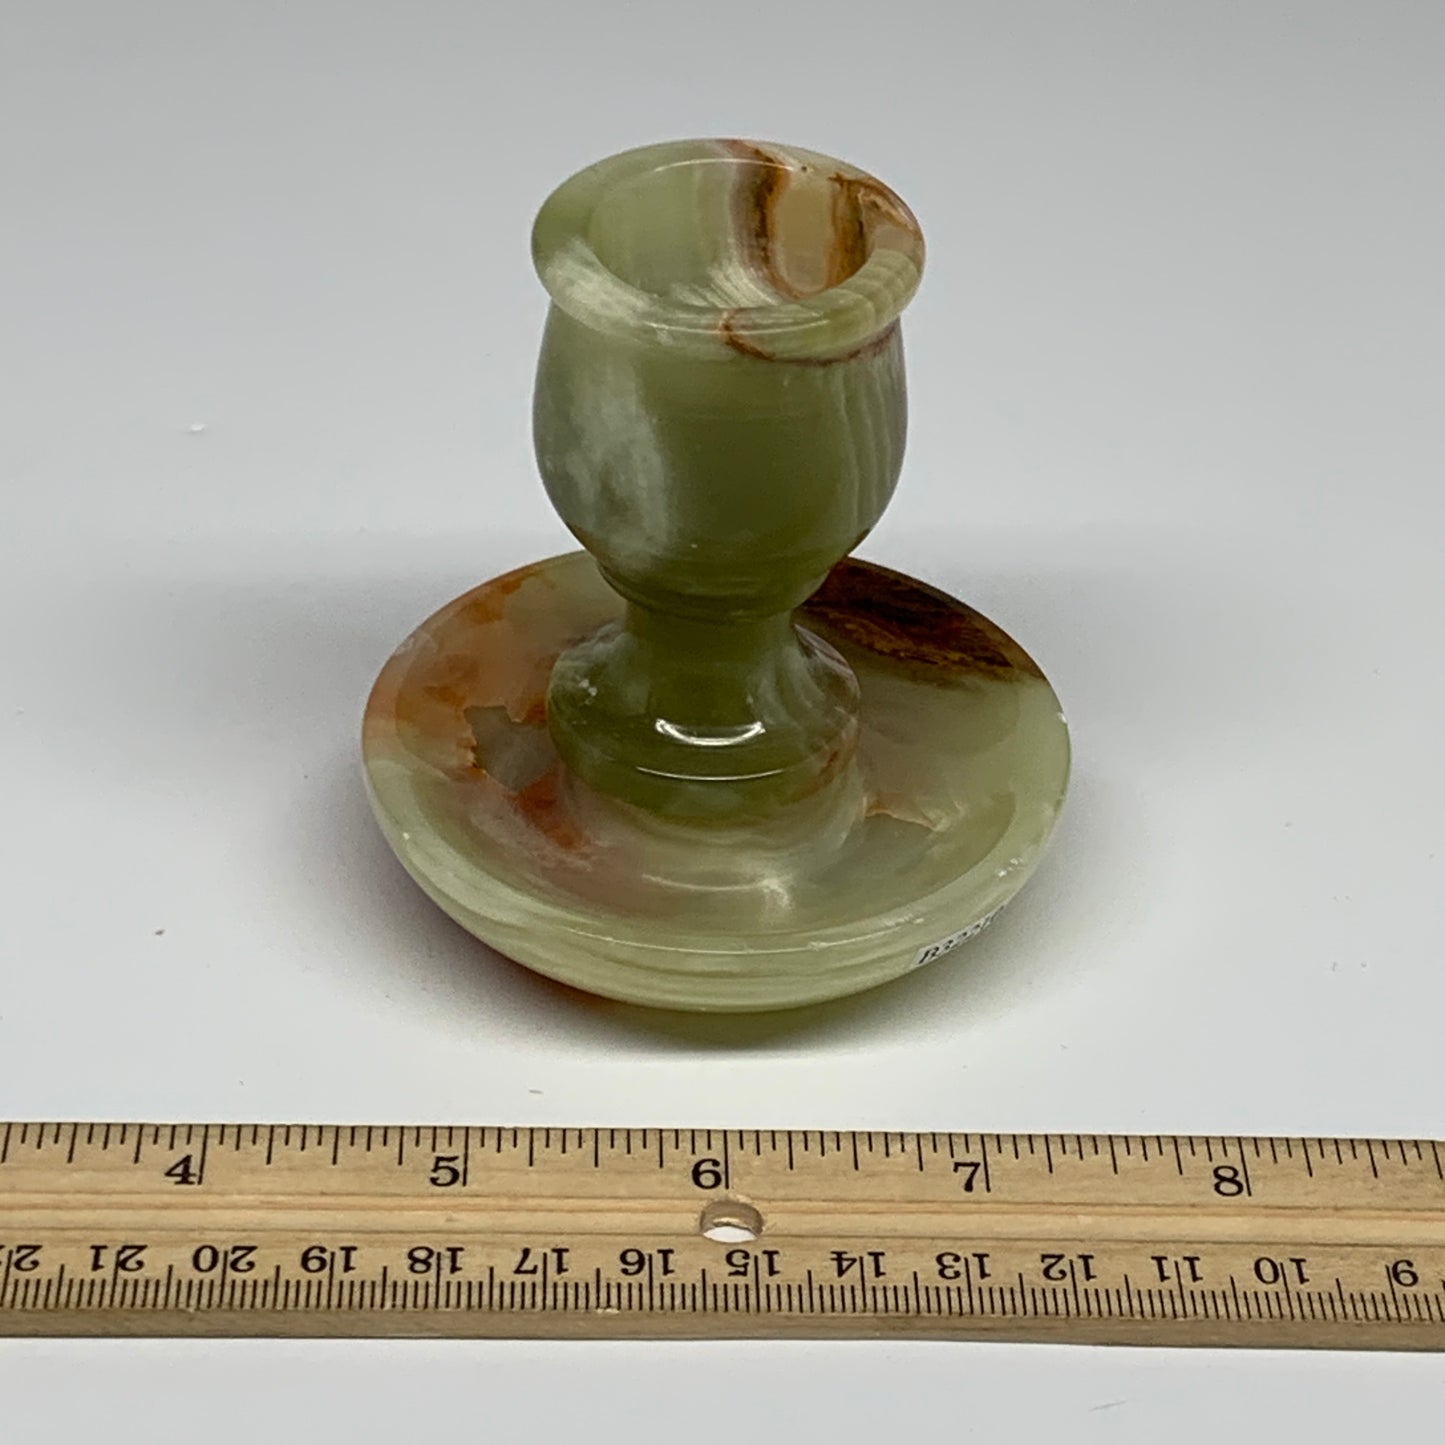 244g, 3.1"x1.5"x2.9", Natural Green Onyx Candle Holder Gemstone Hand Carved, B32